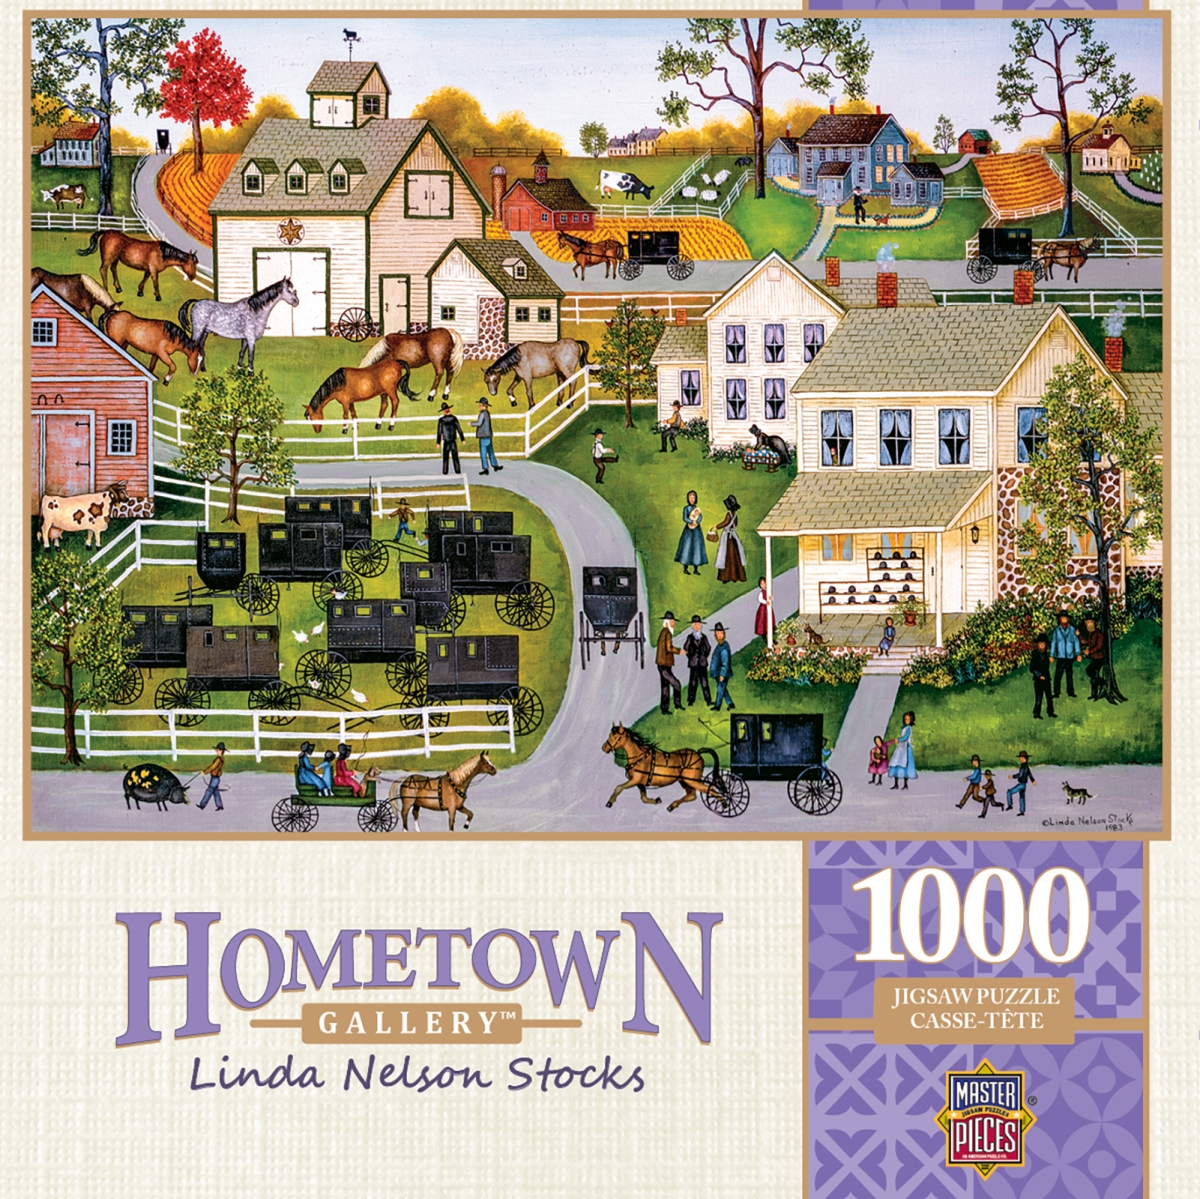 71933 19.25 X 26.75 In. Hometown Gallery Sunday Meeting Jigsaw Puzzle - 1000 Piece